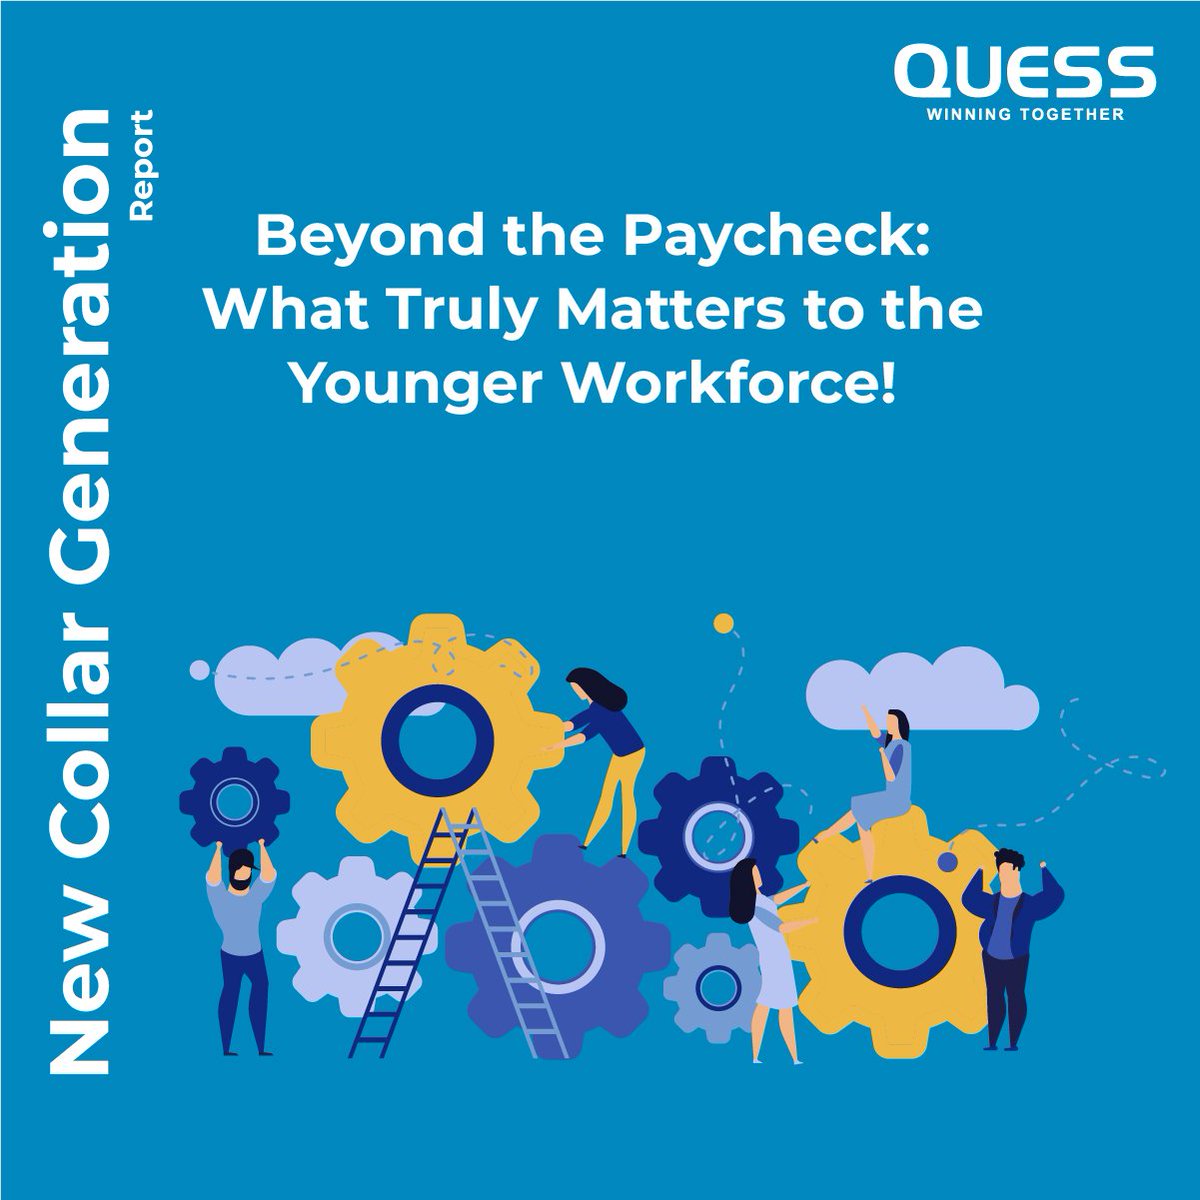 Wage rates are just a part of the puzzle for the younger generation. Over half prioritize prestige and career potential over just earning a living. It's about chasing dreams and building a legacy! 
Visit New Collar Report quesscorp.com/reports/ #NextGenWorkforce #NewCollarReport